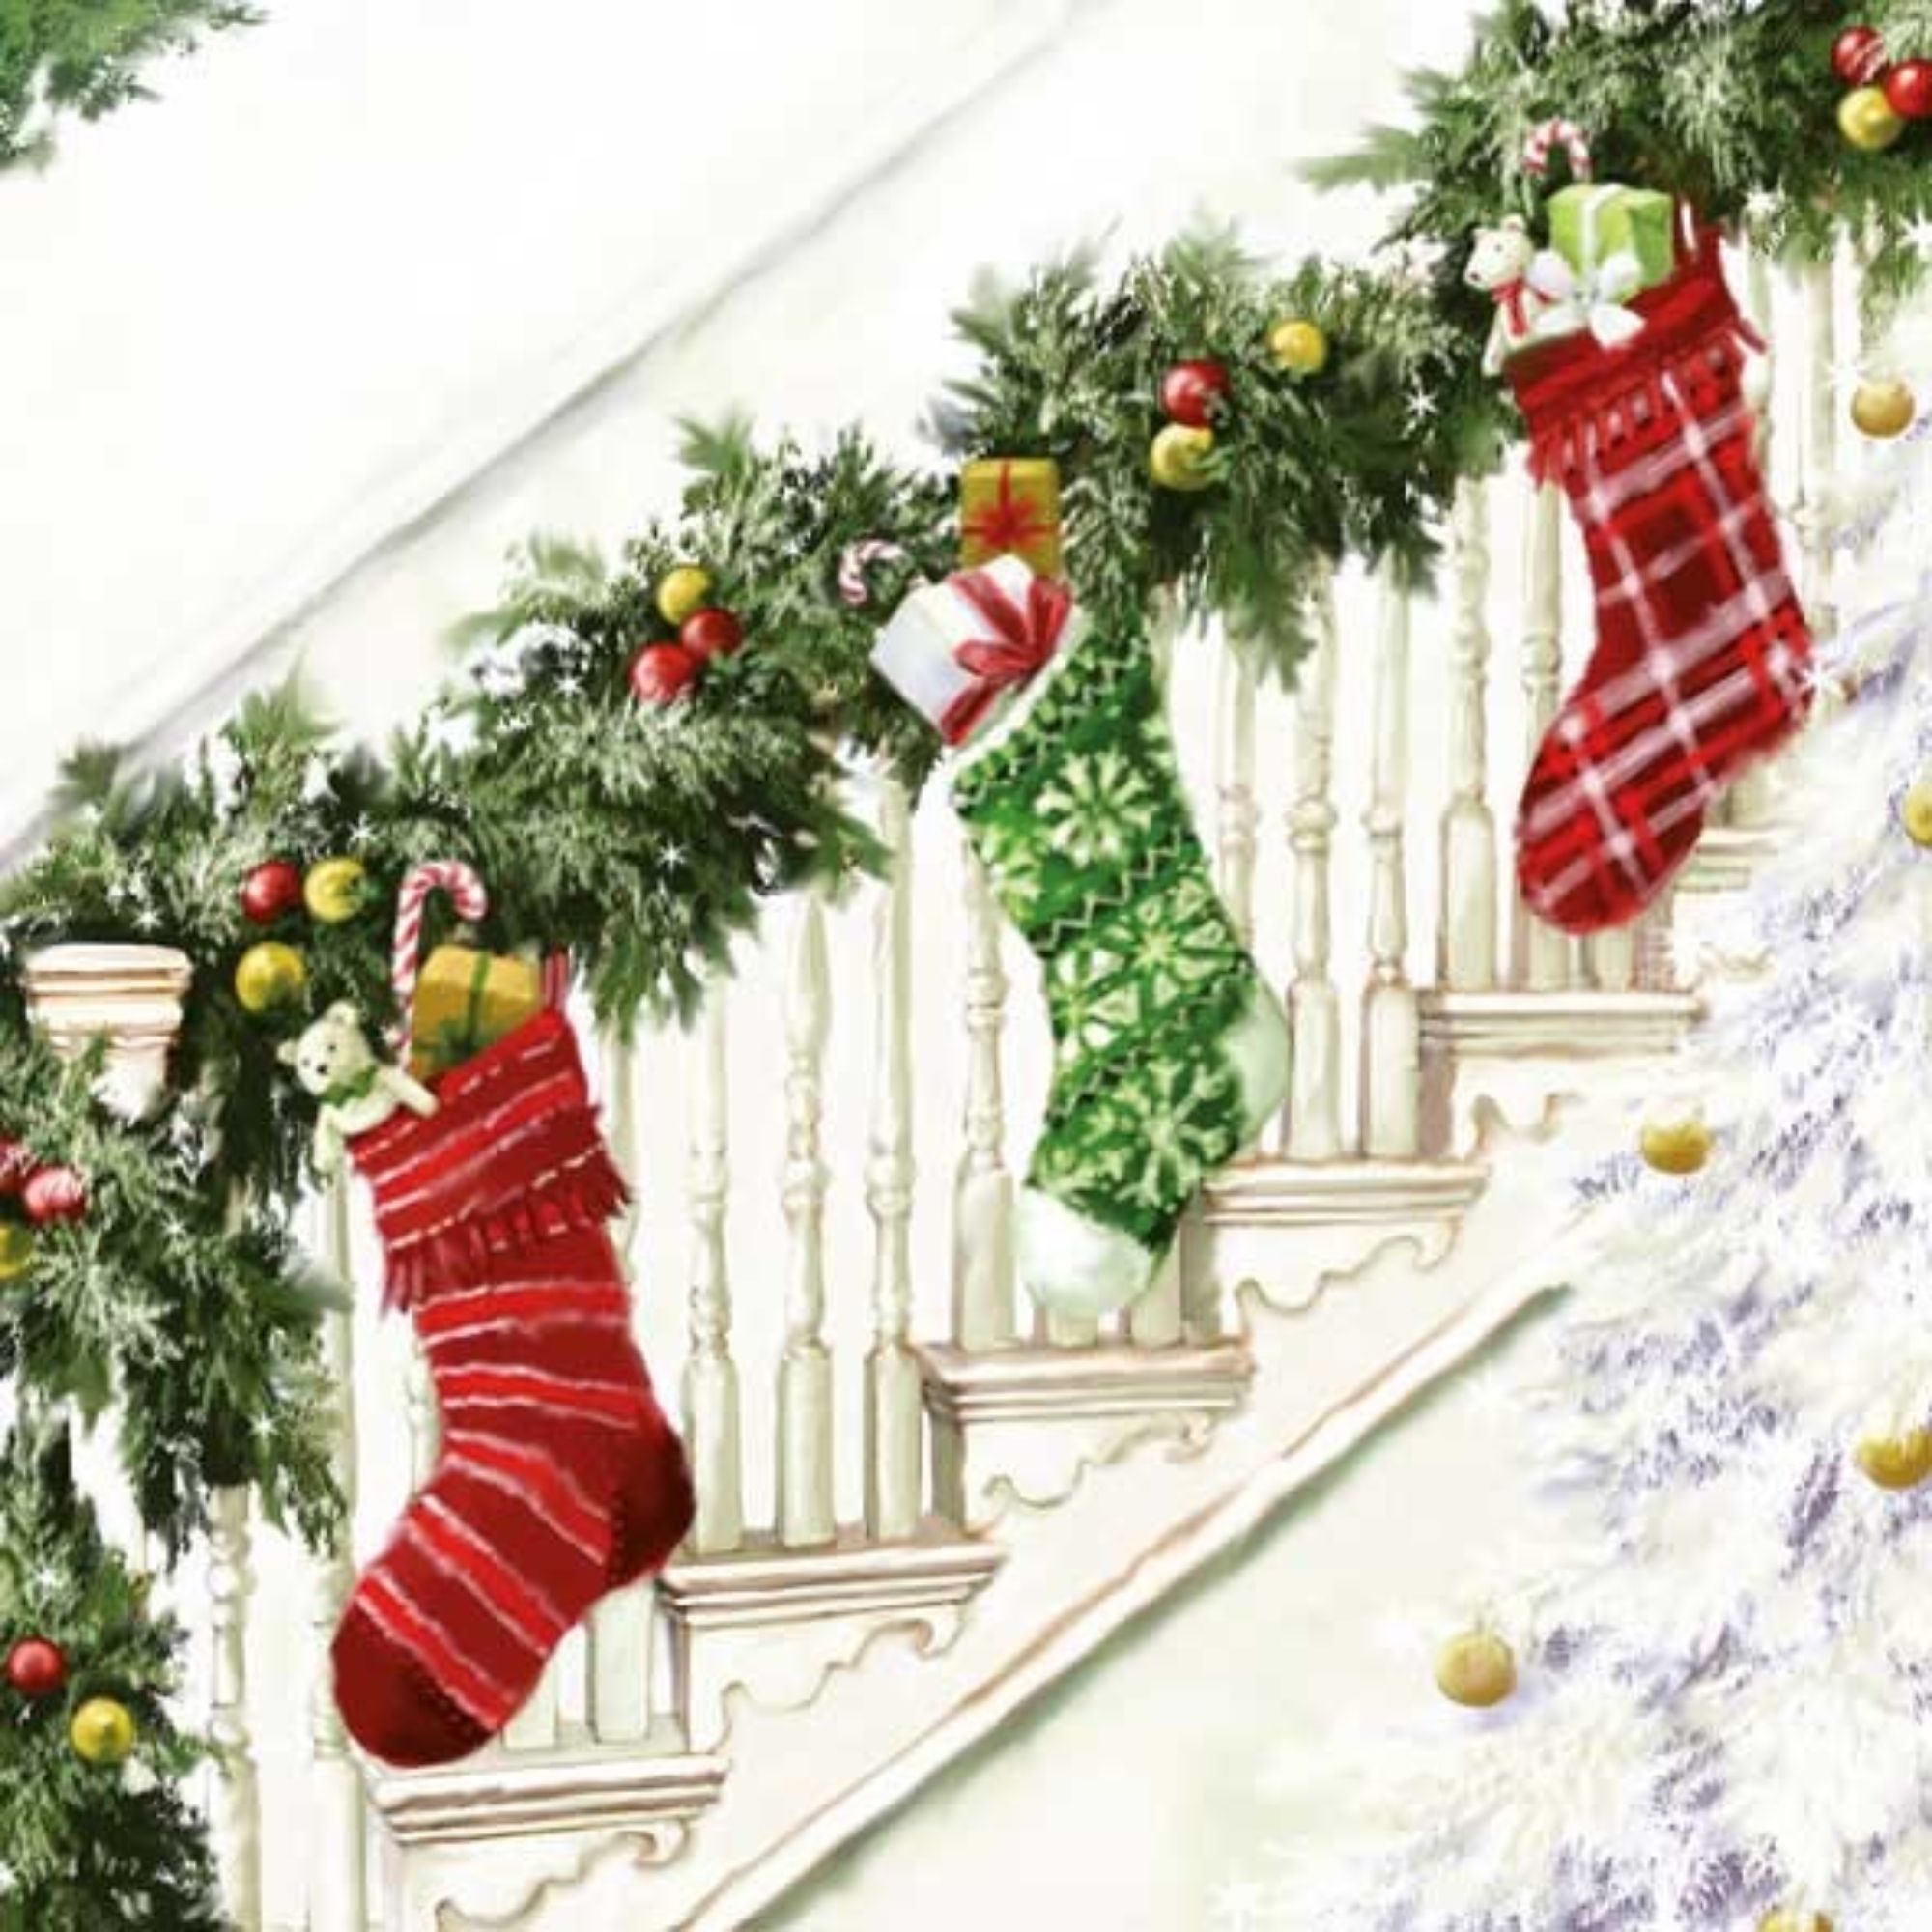 The Ribbon People Pack of 60 Christmas Stockings on Staircase 3-Ply Lunch Napkins 6.5"